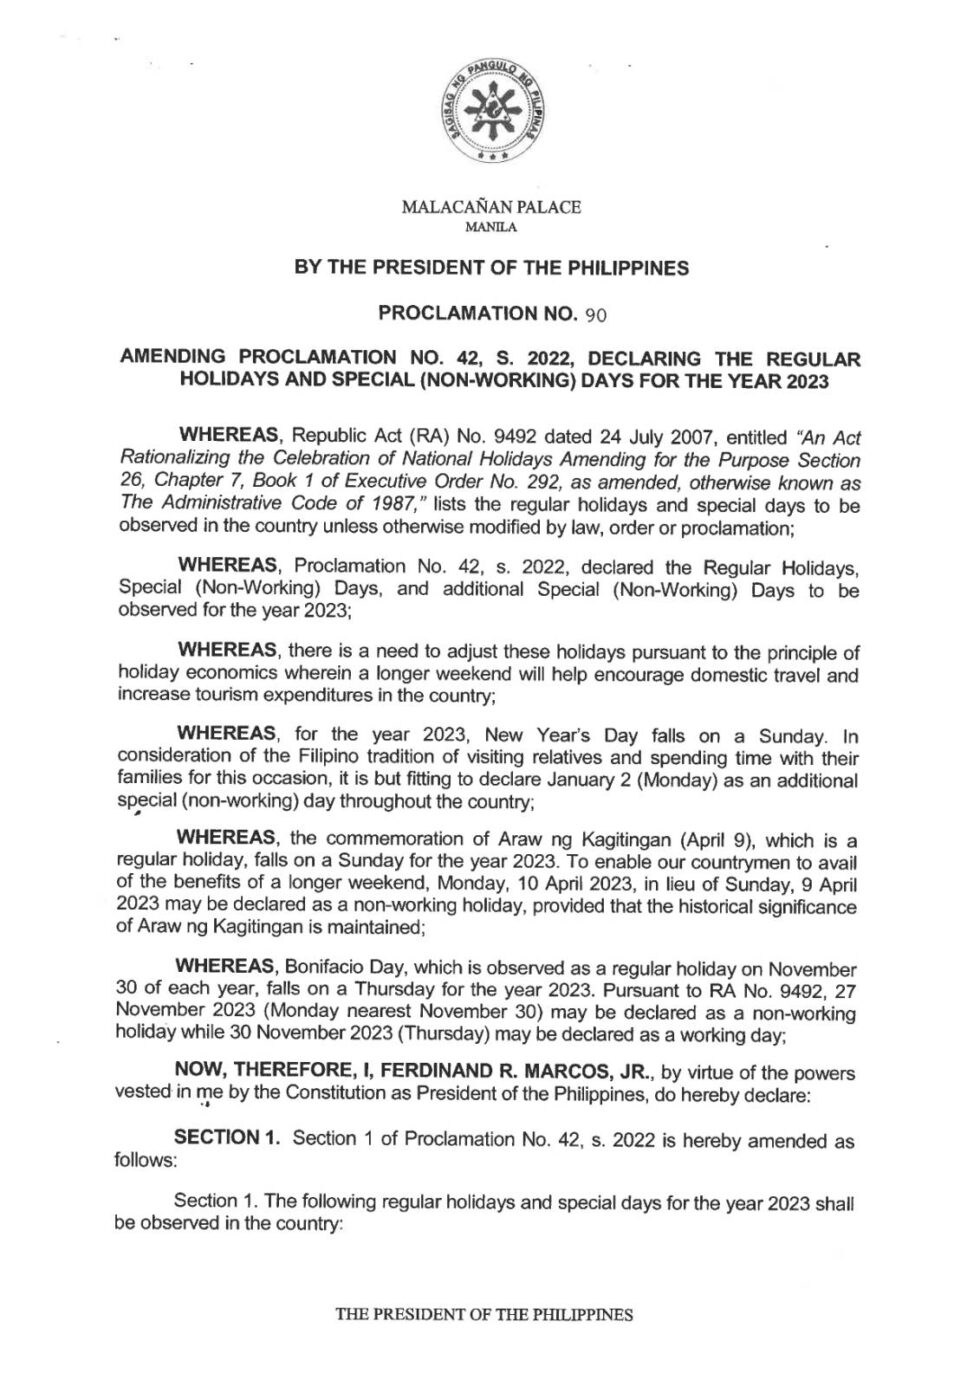 Palace updates list of holidays for 2023